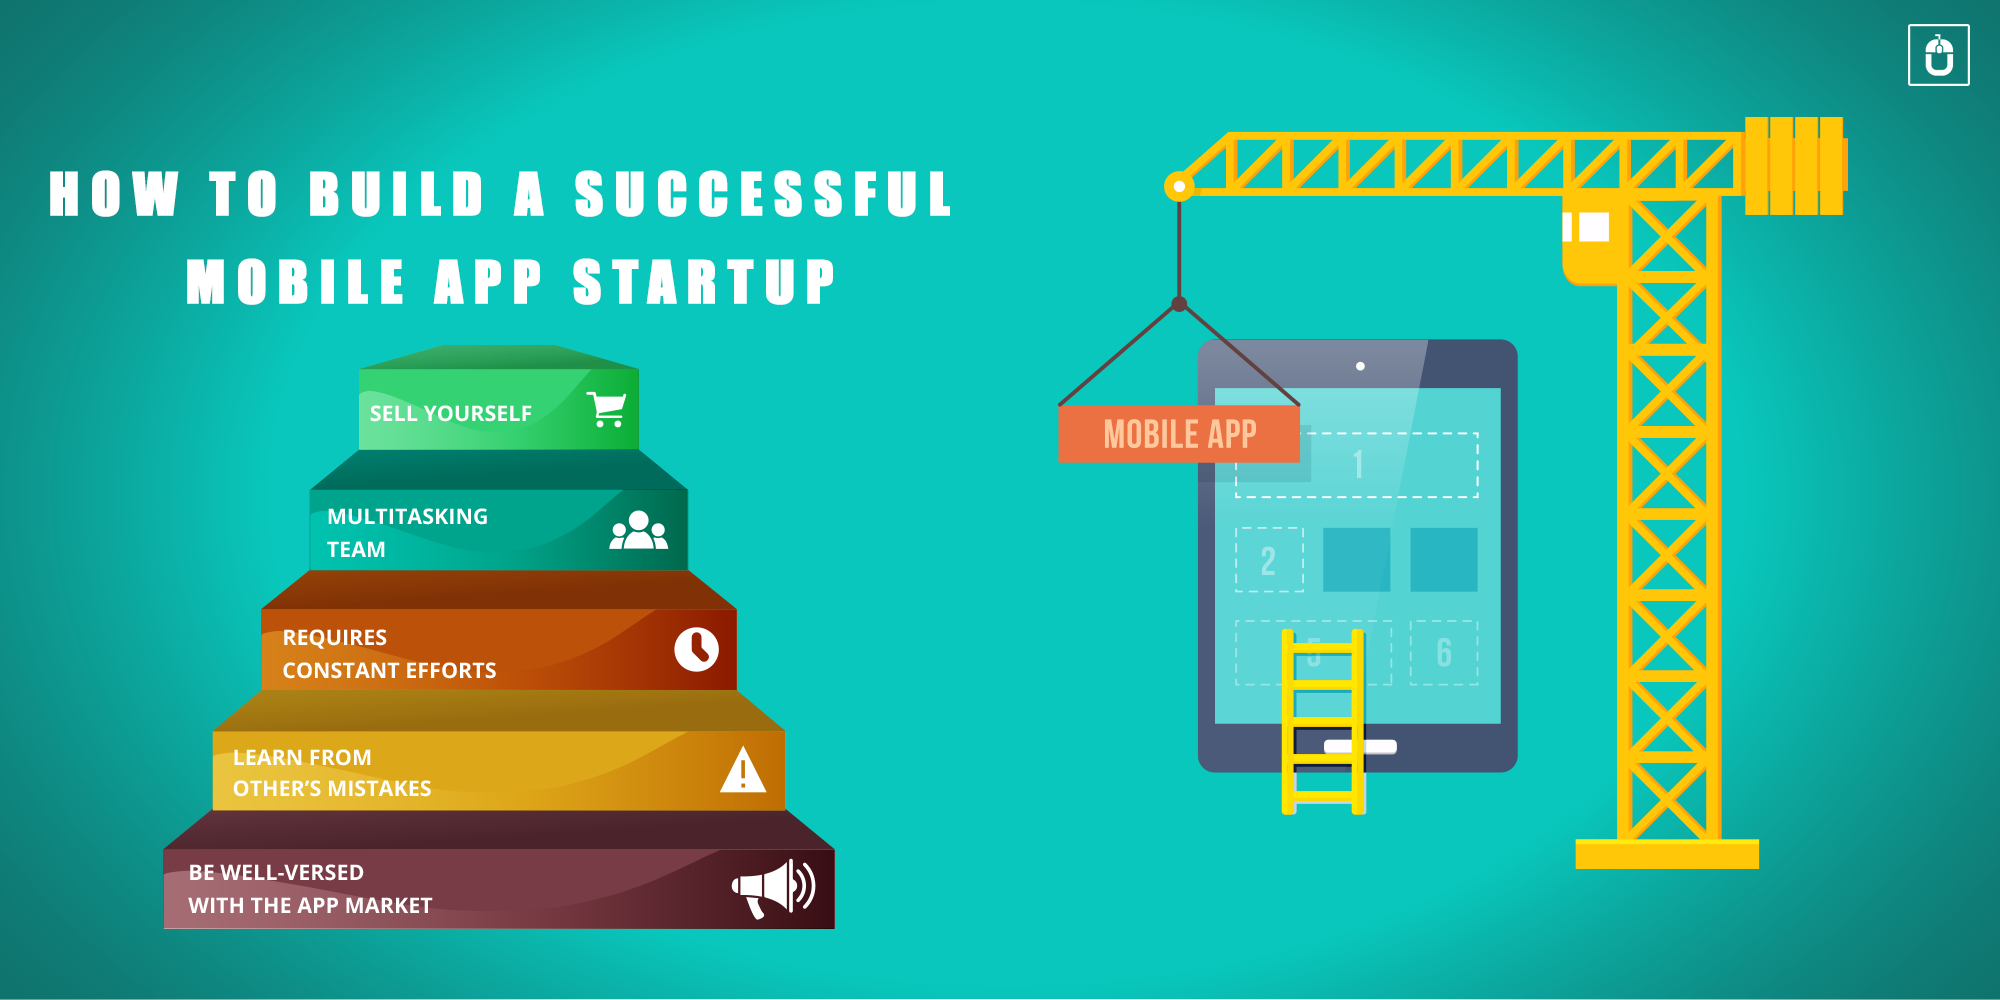 How To Build A Successful Mobile App Startup